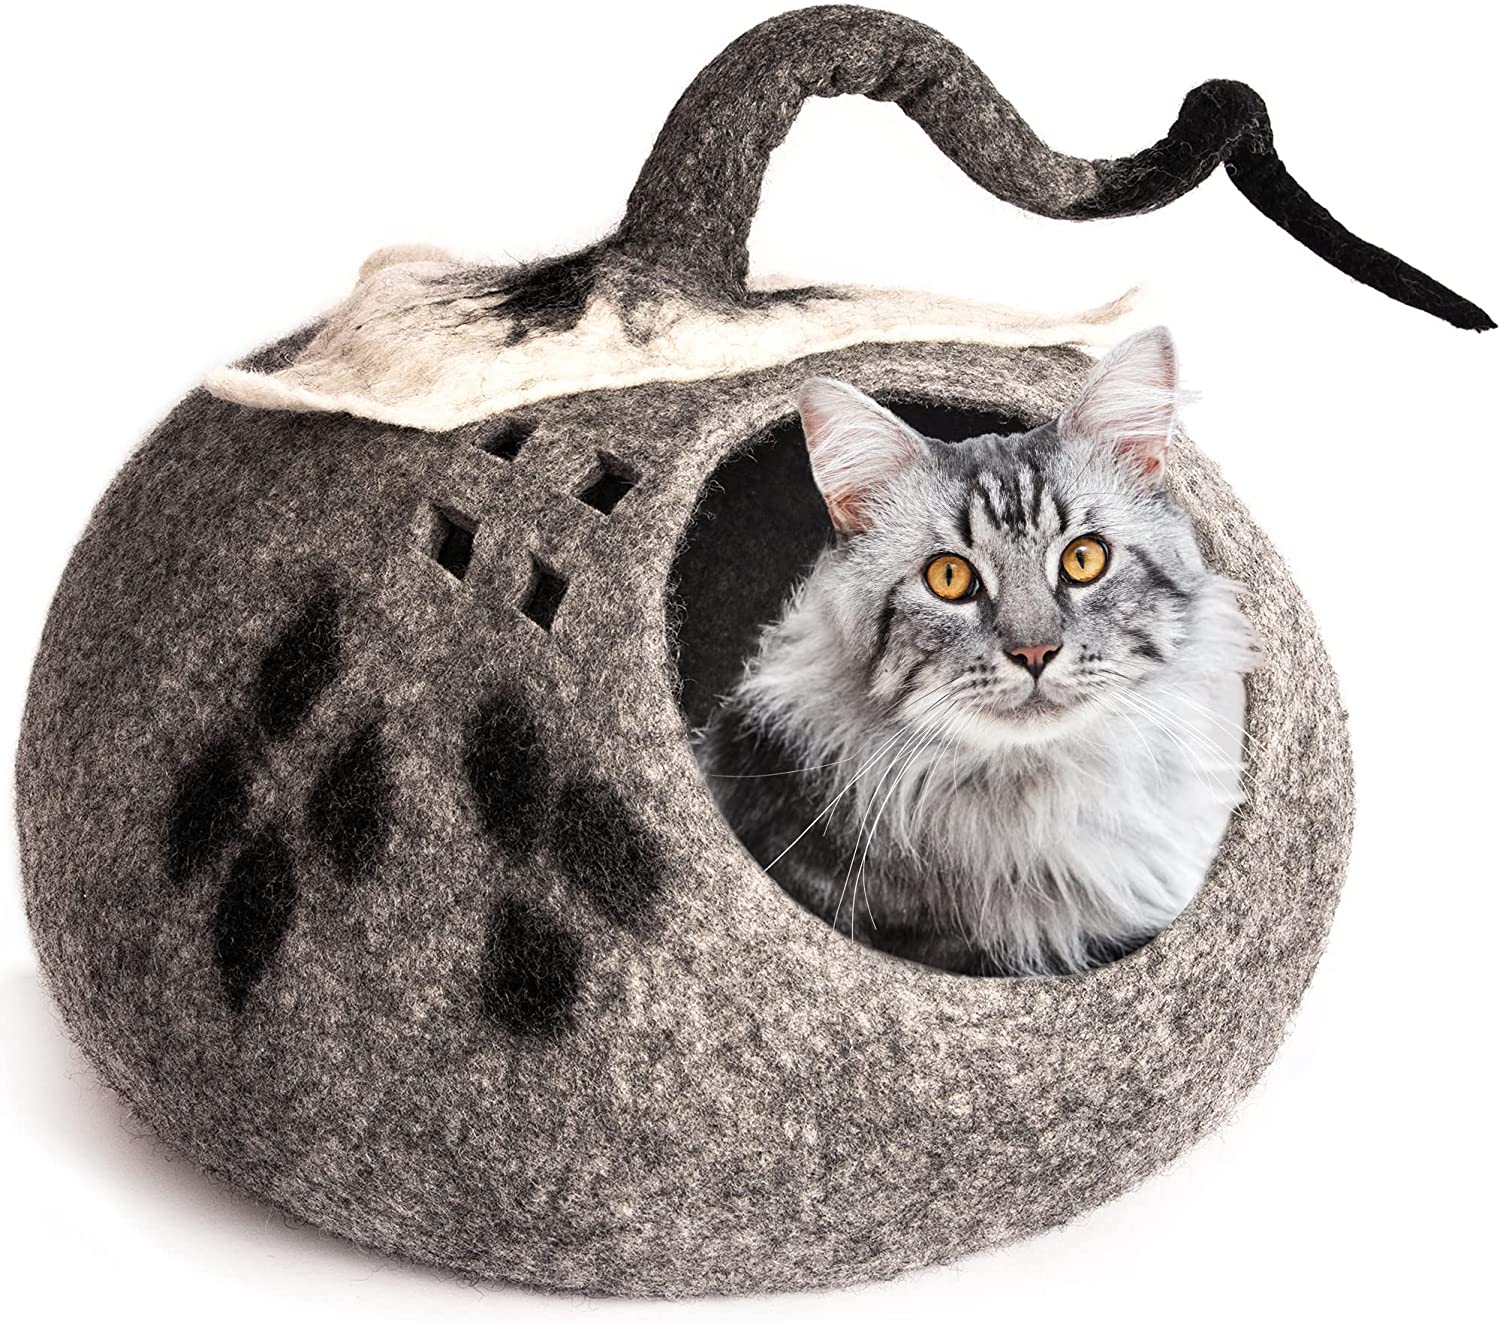  Eco cat bed for large cat - color grey